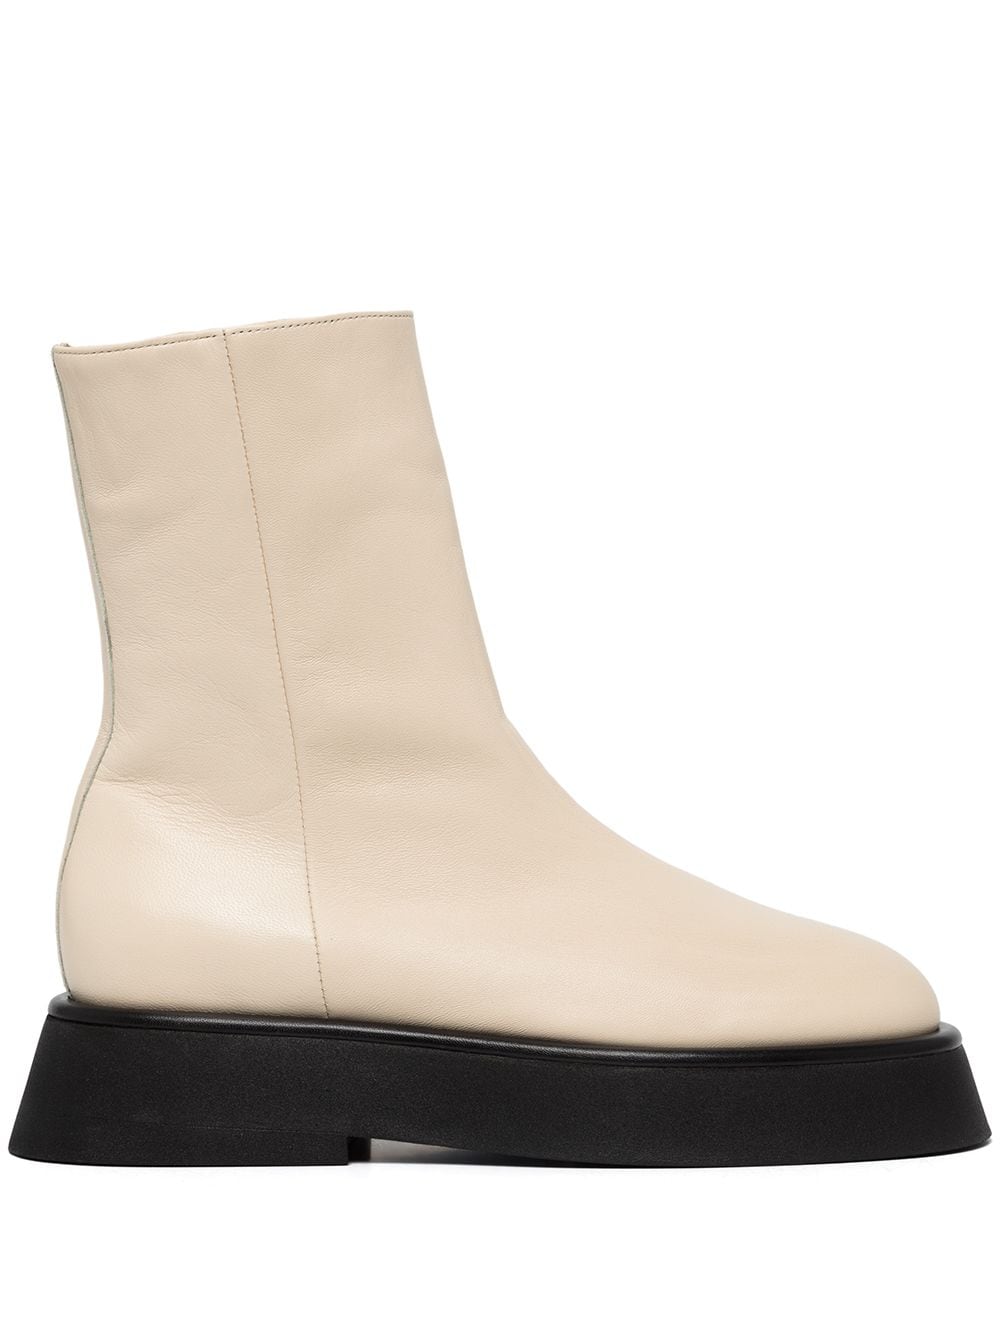 Wandler side-zip ankle leather boots - White von Wandler